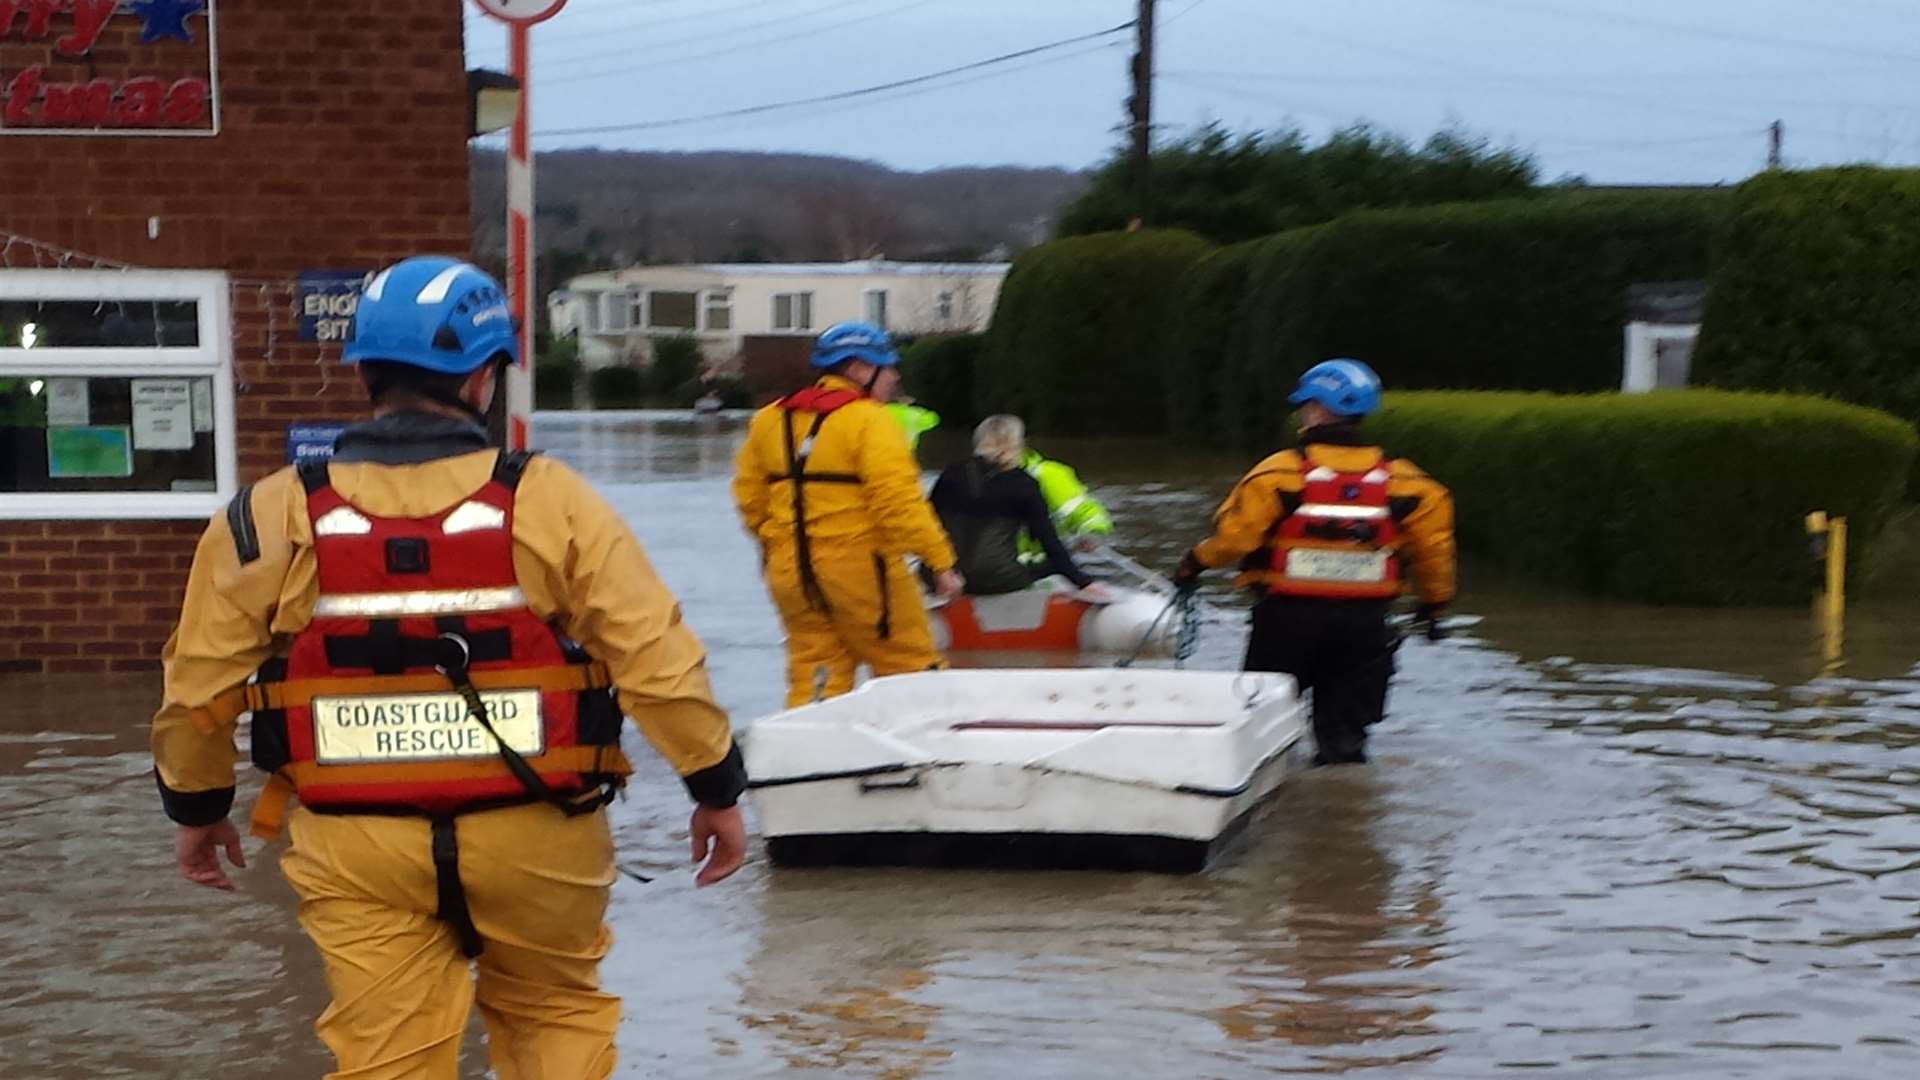 Coastguard teams use boats to rescue the stranded at Yalding. Picture: Medway Coastguard